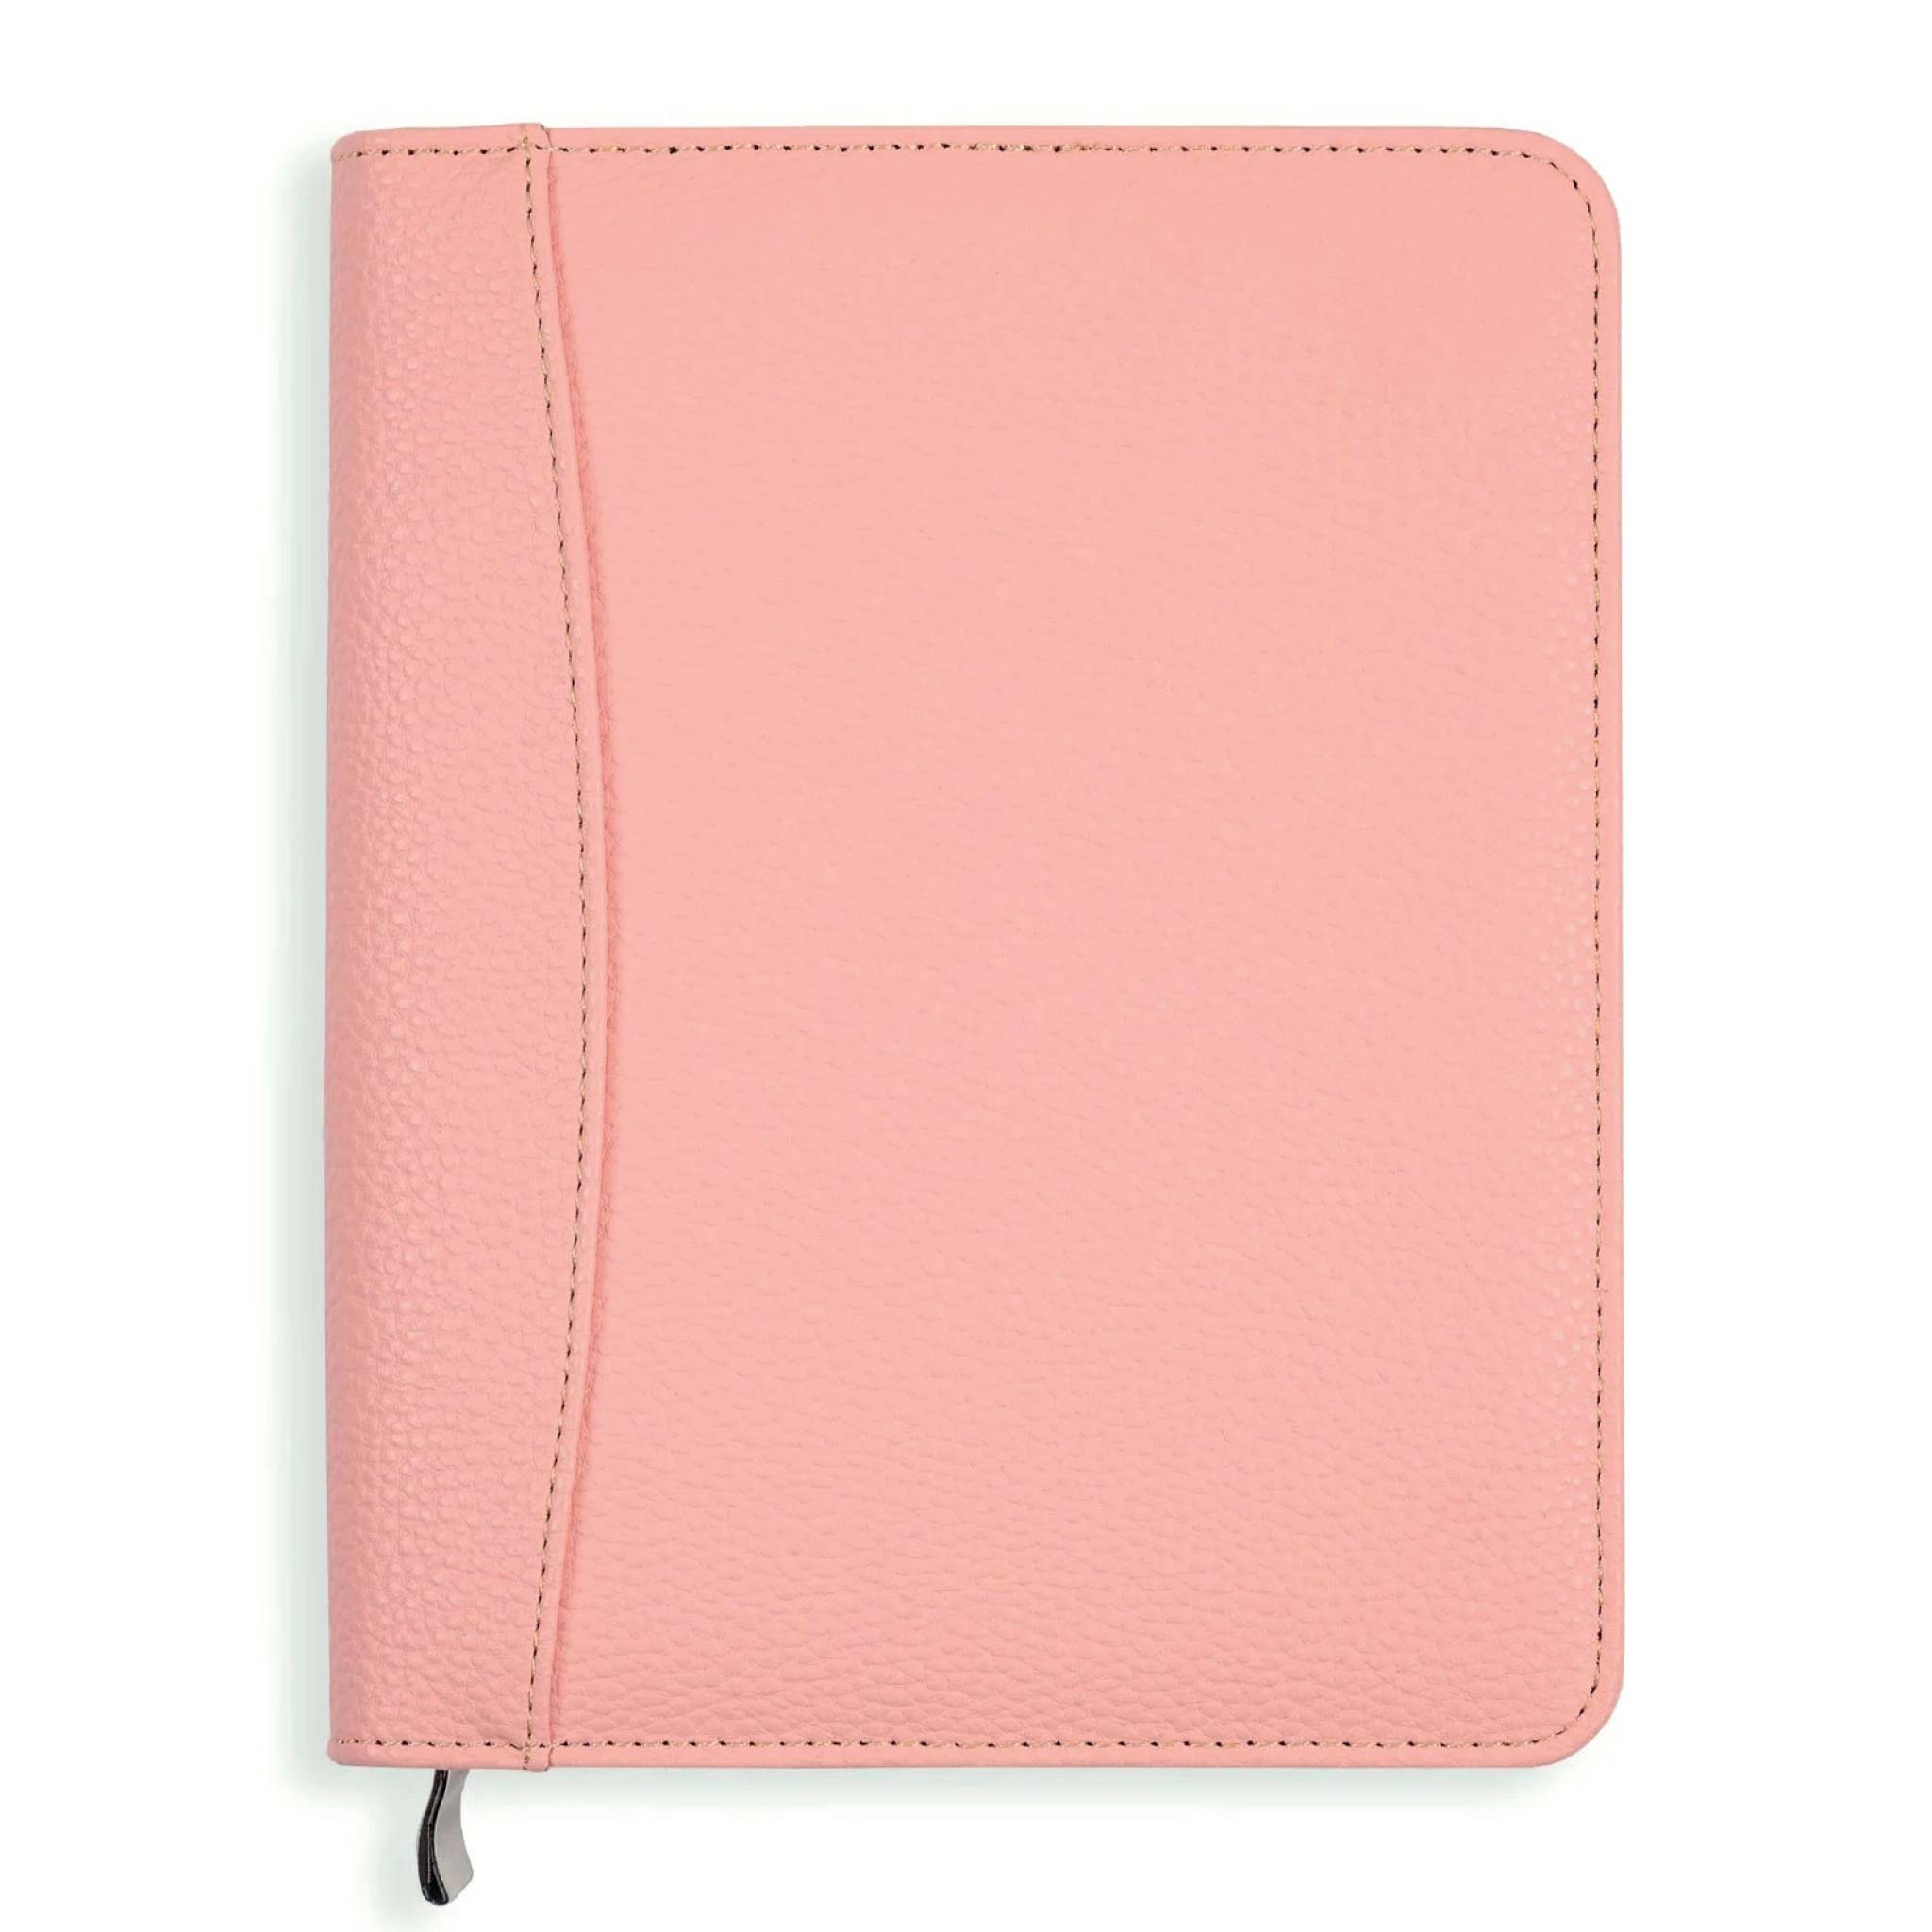 An image of Luxury Everyday Diary Cover | Full-Zip Cover with Internal Pocket Bloom